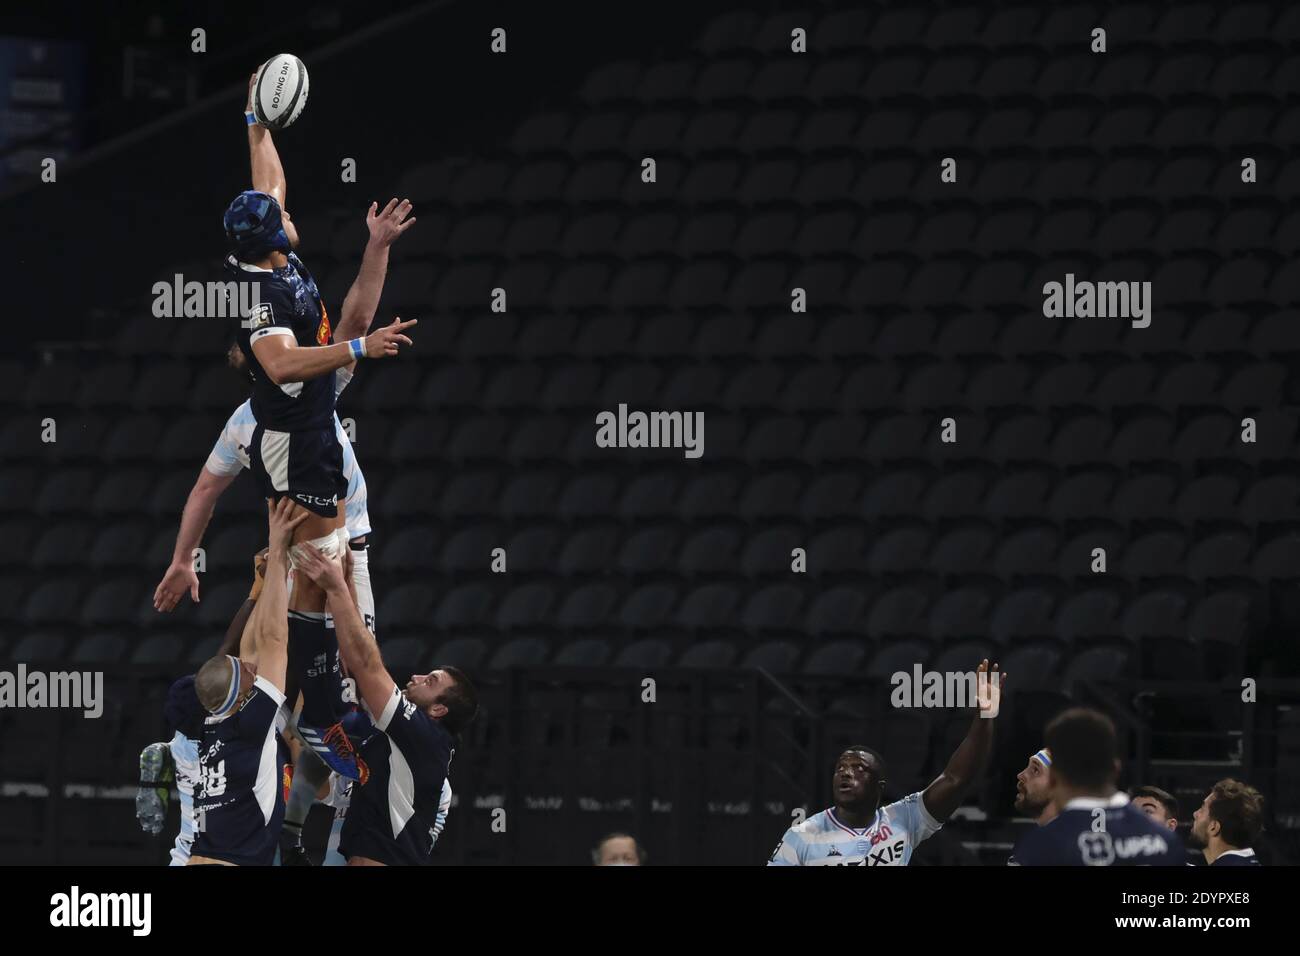 Nanterre, Hauts de Seine, France. 27th Dec, 2020. Agen Flanker ROMAIN BRIATTE in action during the French rugby Championship Top 14 between Racing 92 and Agen at U Arena Stadium in Nanterre - France.Racing 92 Won 45-10. Credit: Pierre Stevenin/ZUMA Wire/Alamy Live News Stock Photo